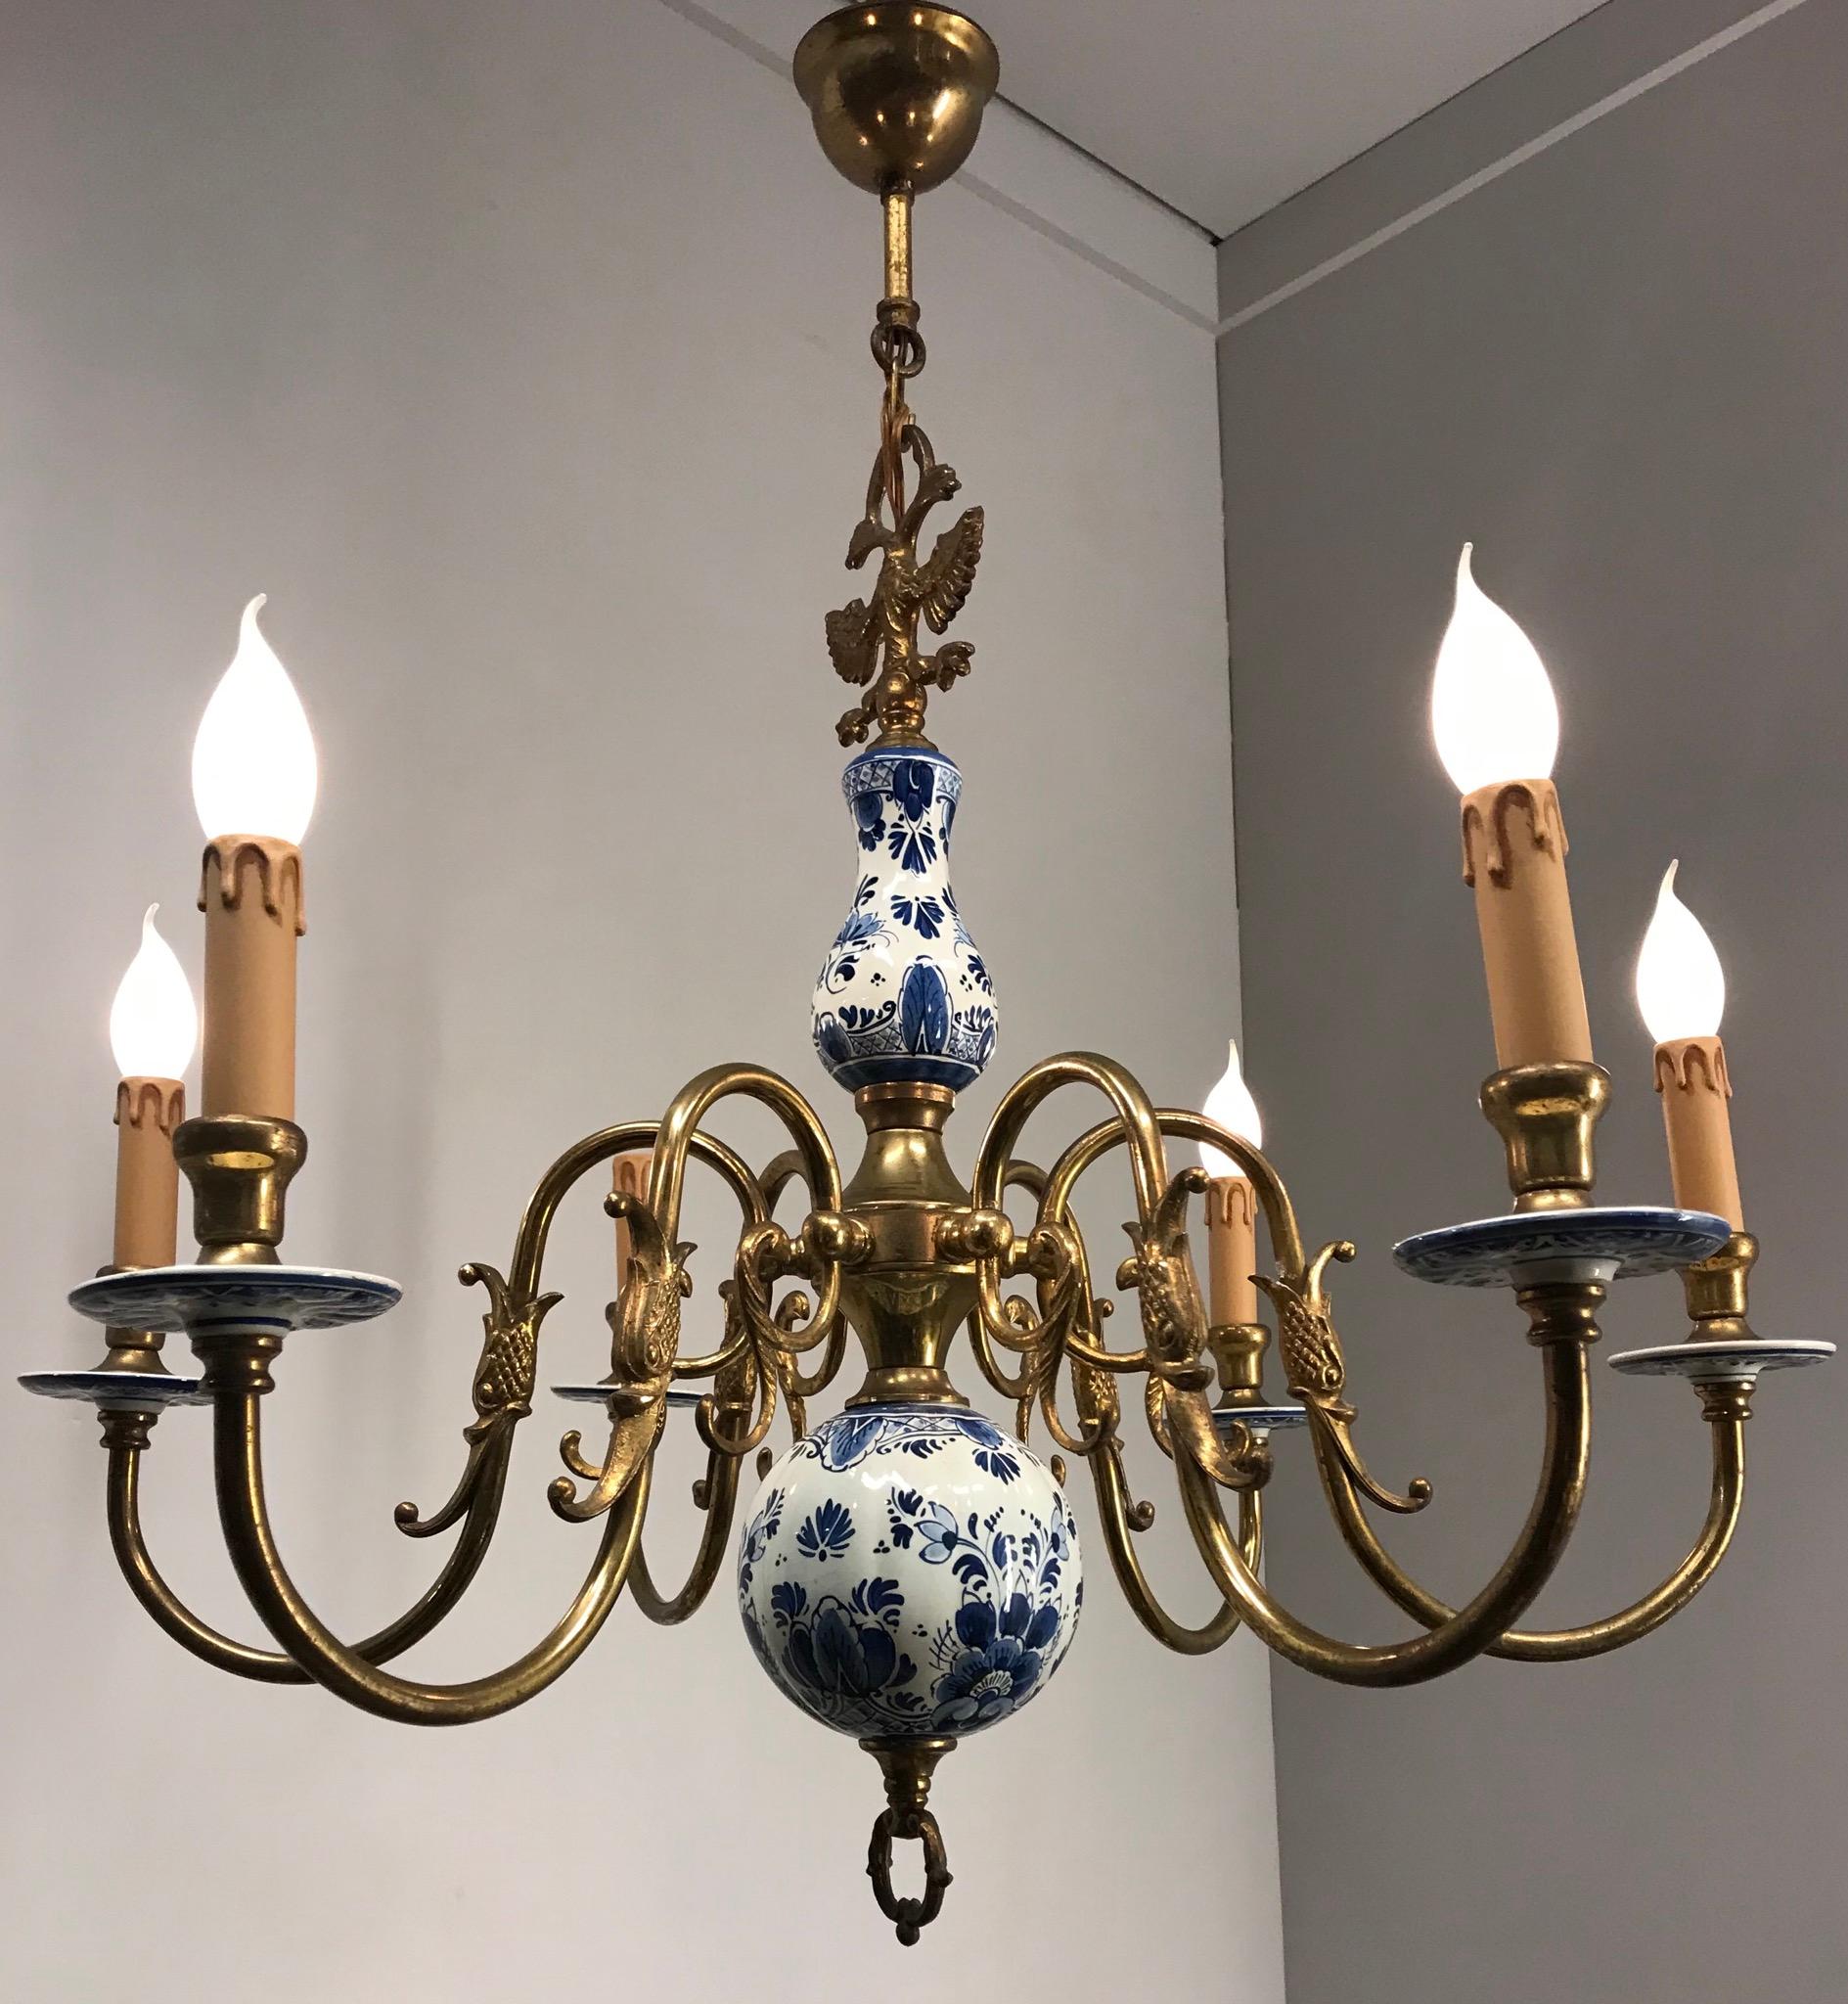 Stunning and good size, six light pendant.

This decorative and top quality made pendant could be perfect for you. Both on and off this great workmanship fixture can create just the right atmosphere in your dining or living room. However, it would